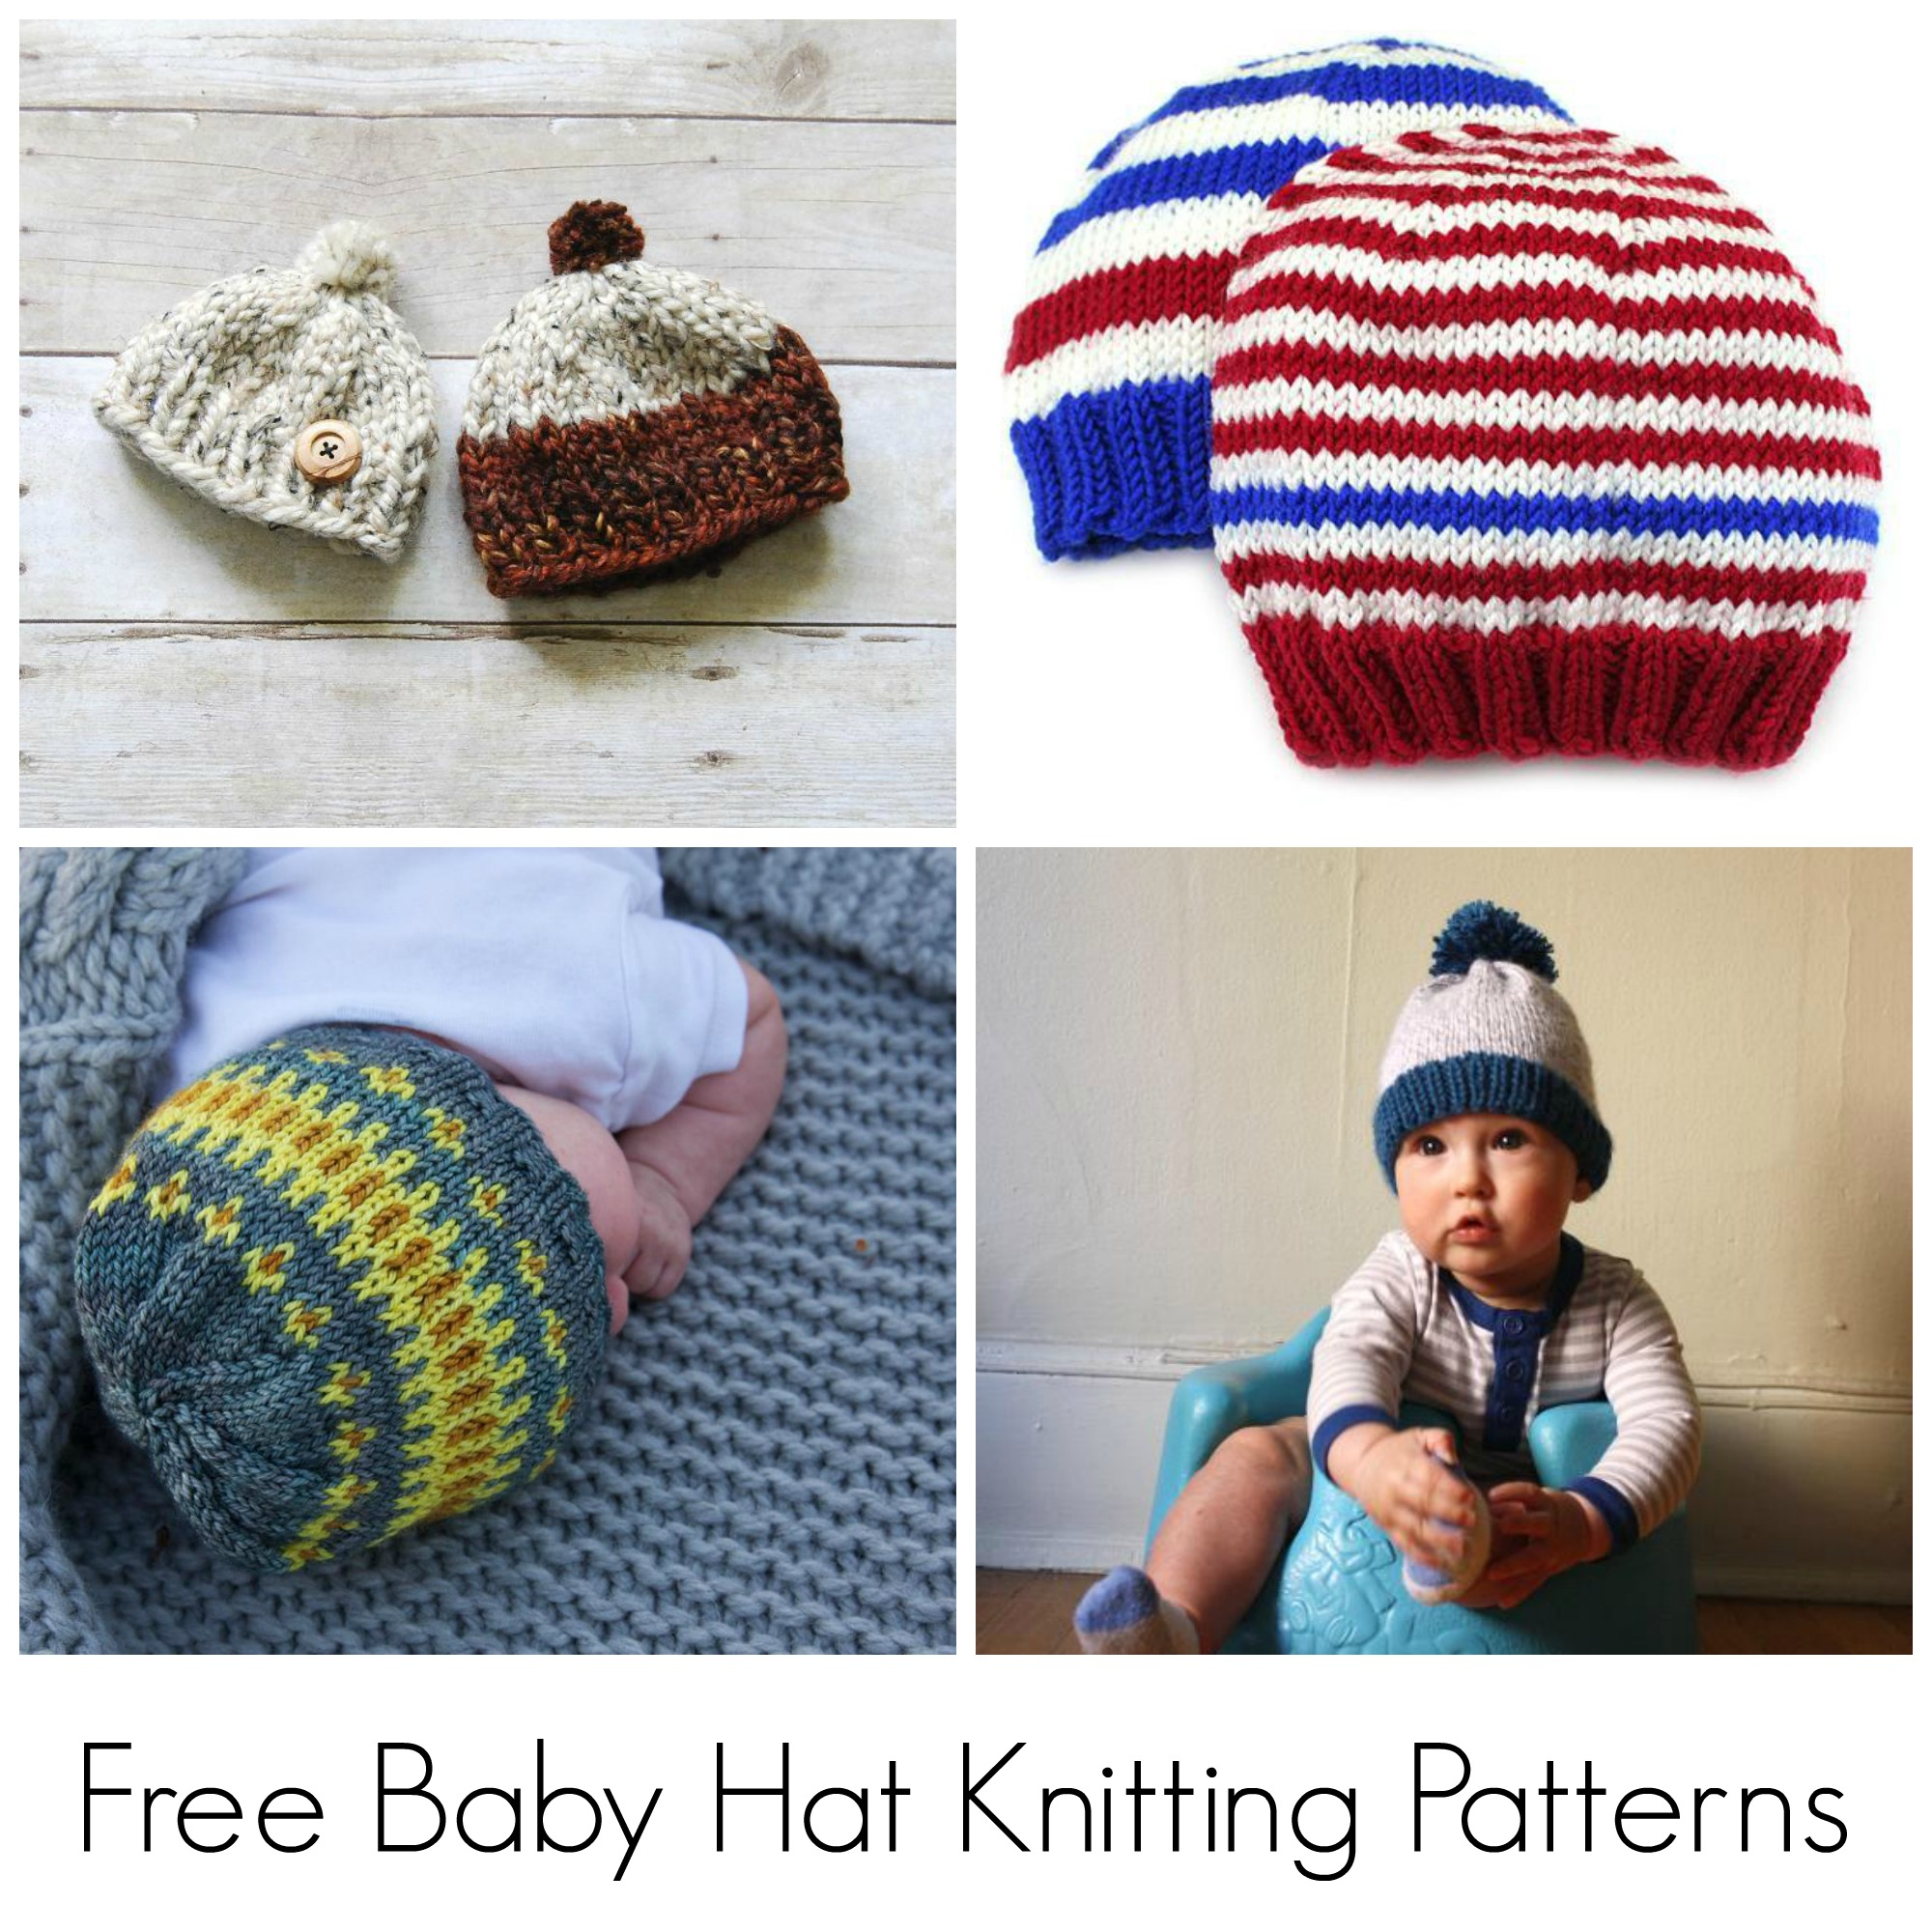 Knitting Patterns Baby Hat 10 Free Knitting Patterns For Ba Hats On Craftsy